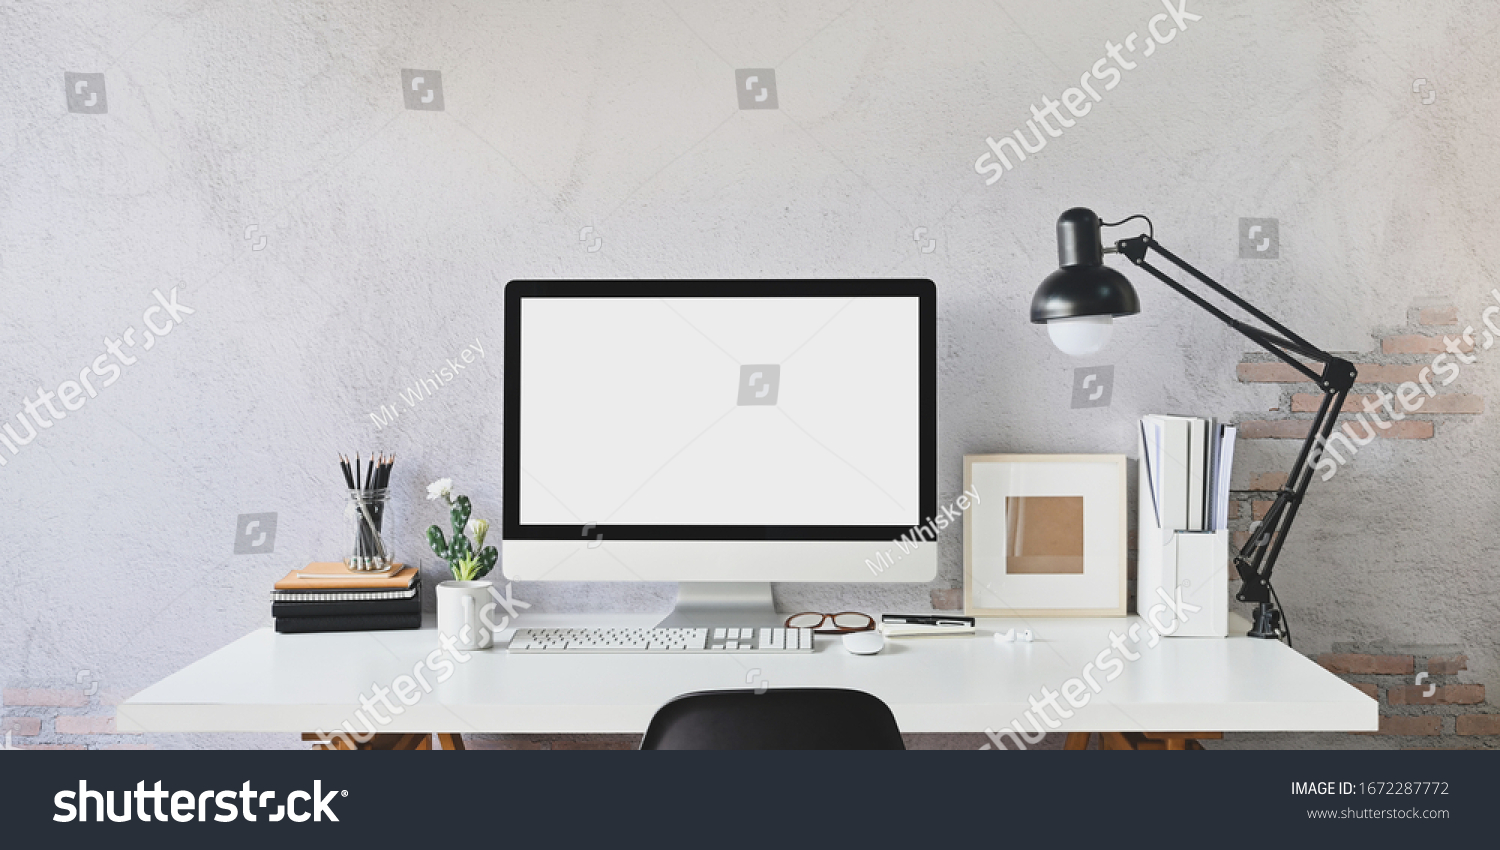 Workspace blank screen Computer and Equipment on table and loft wall background. #1672287772